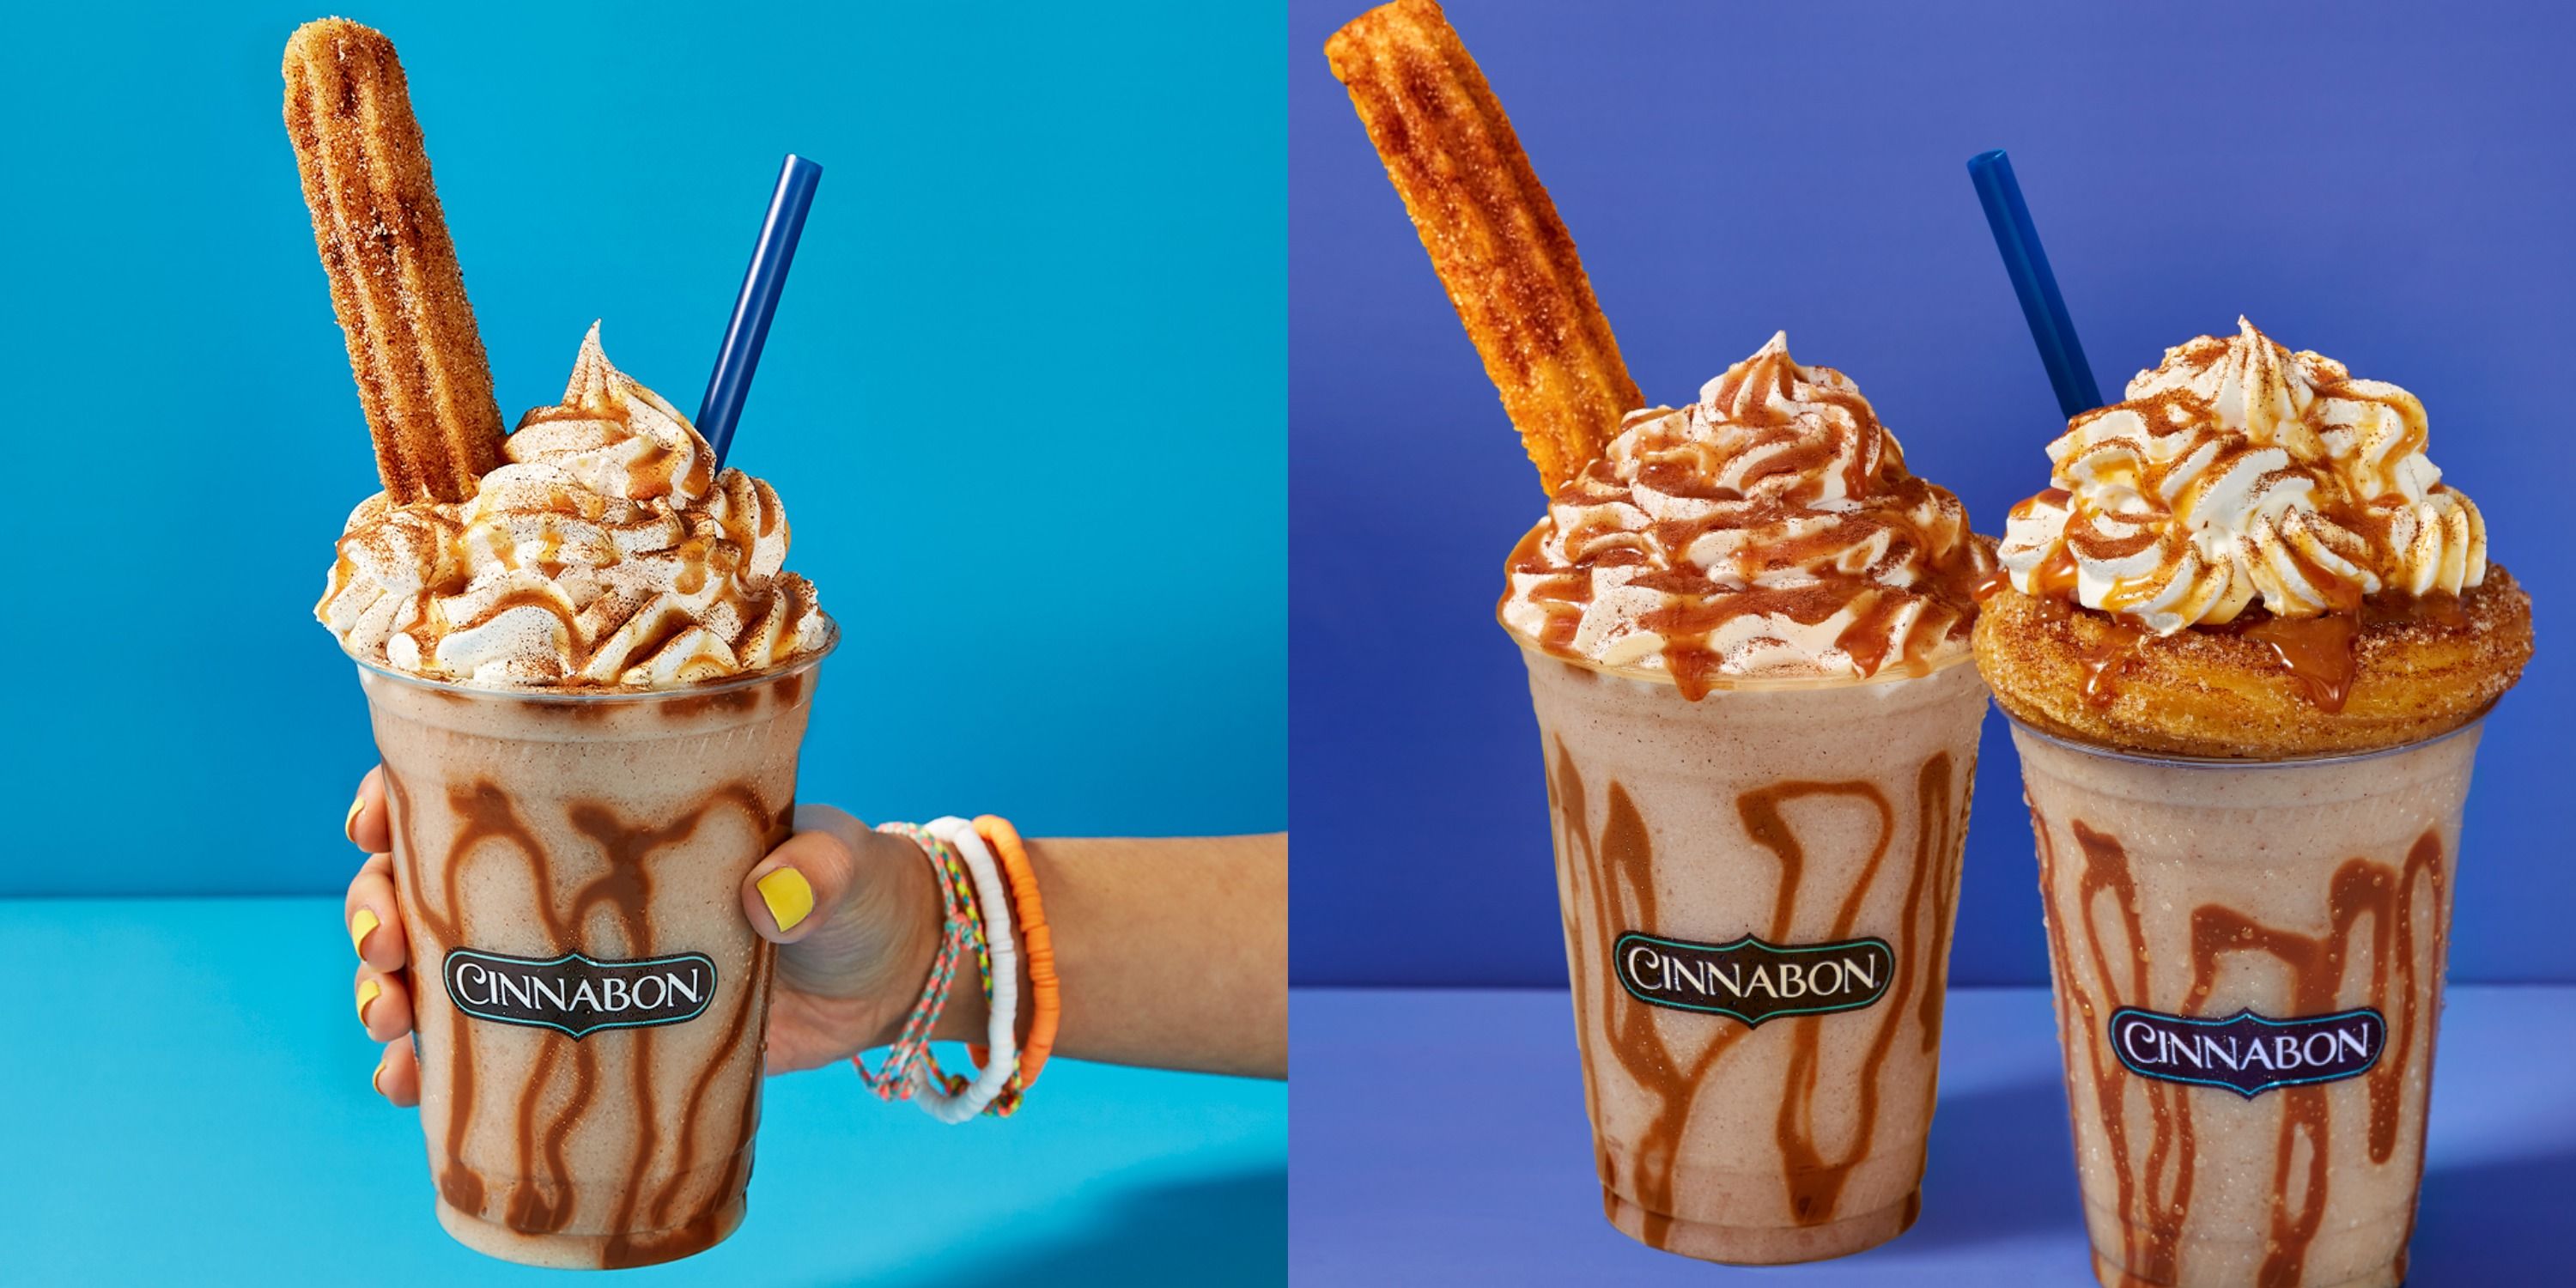 Well, Cinnabon isn’t just serving up churros these.